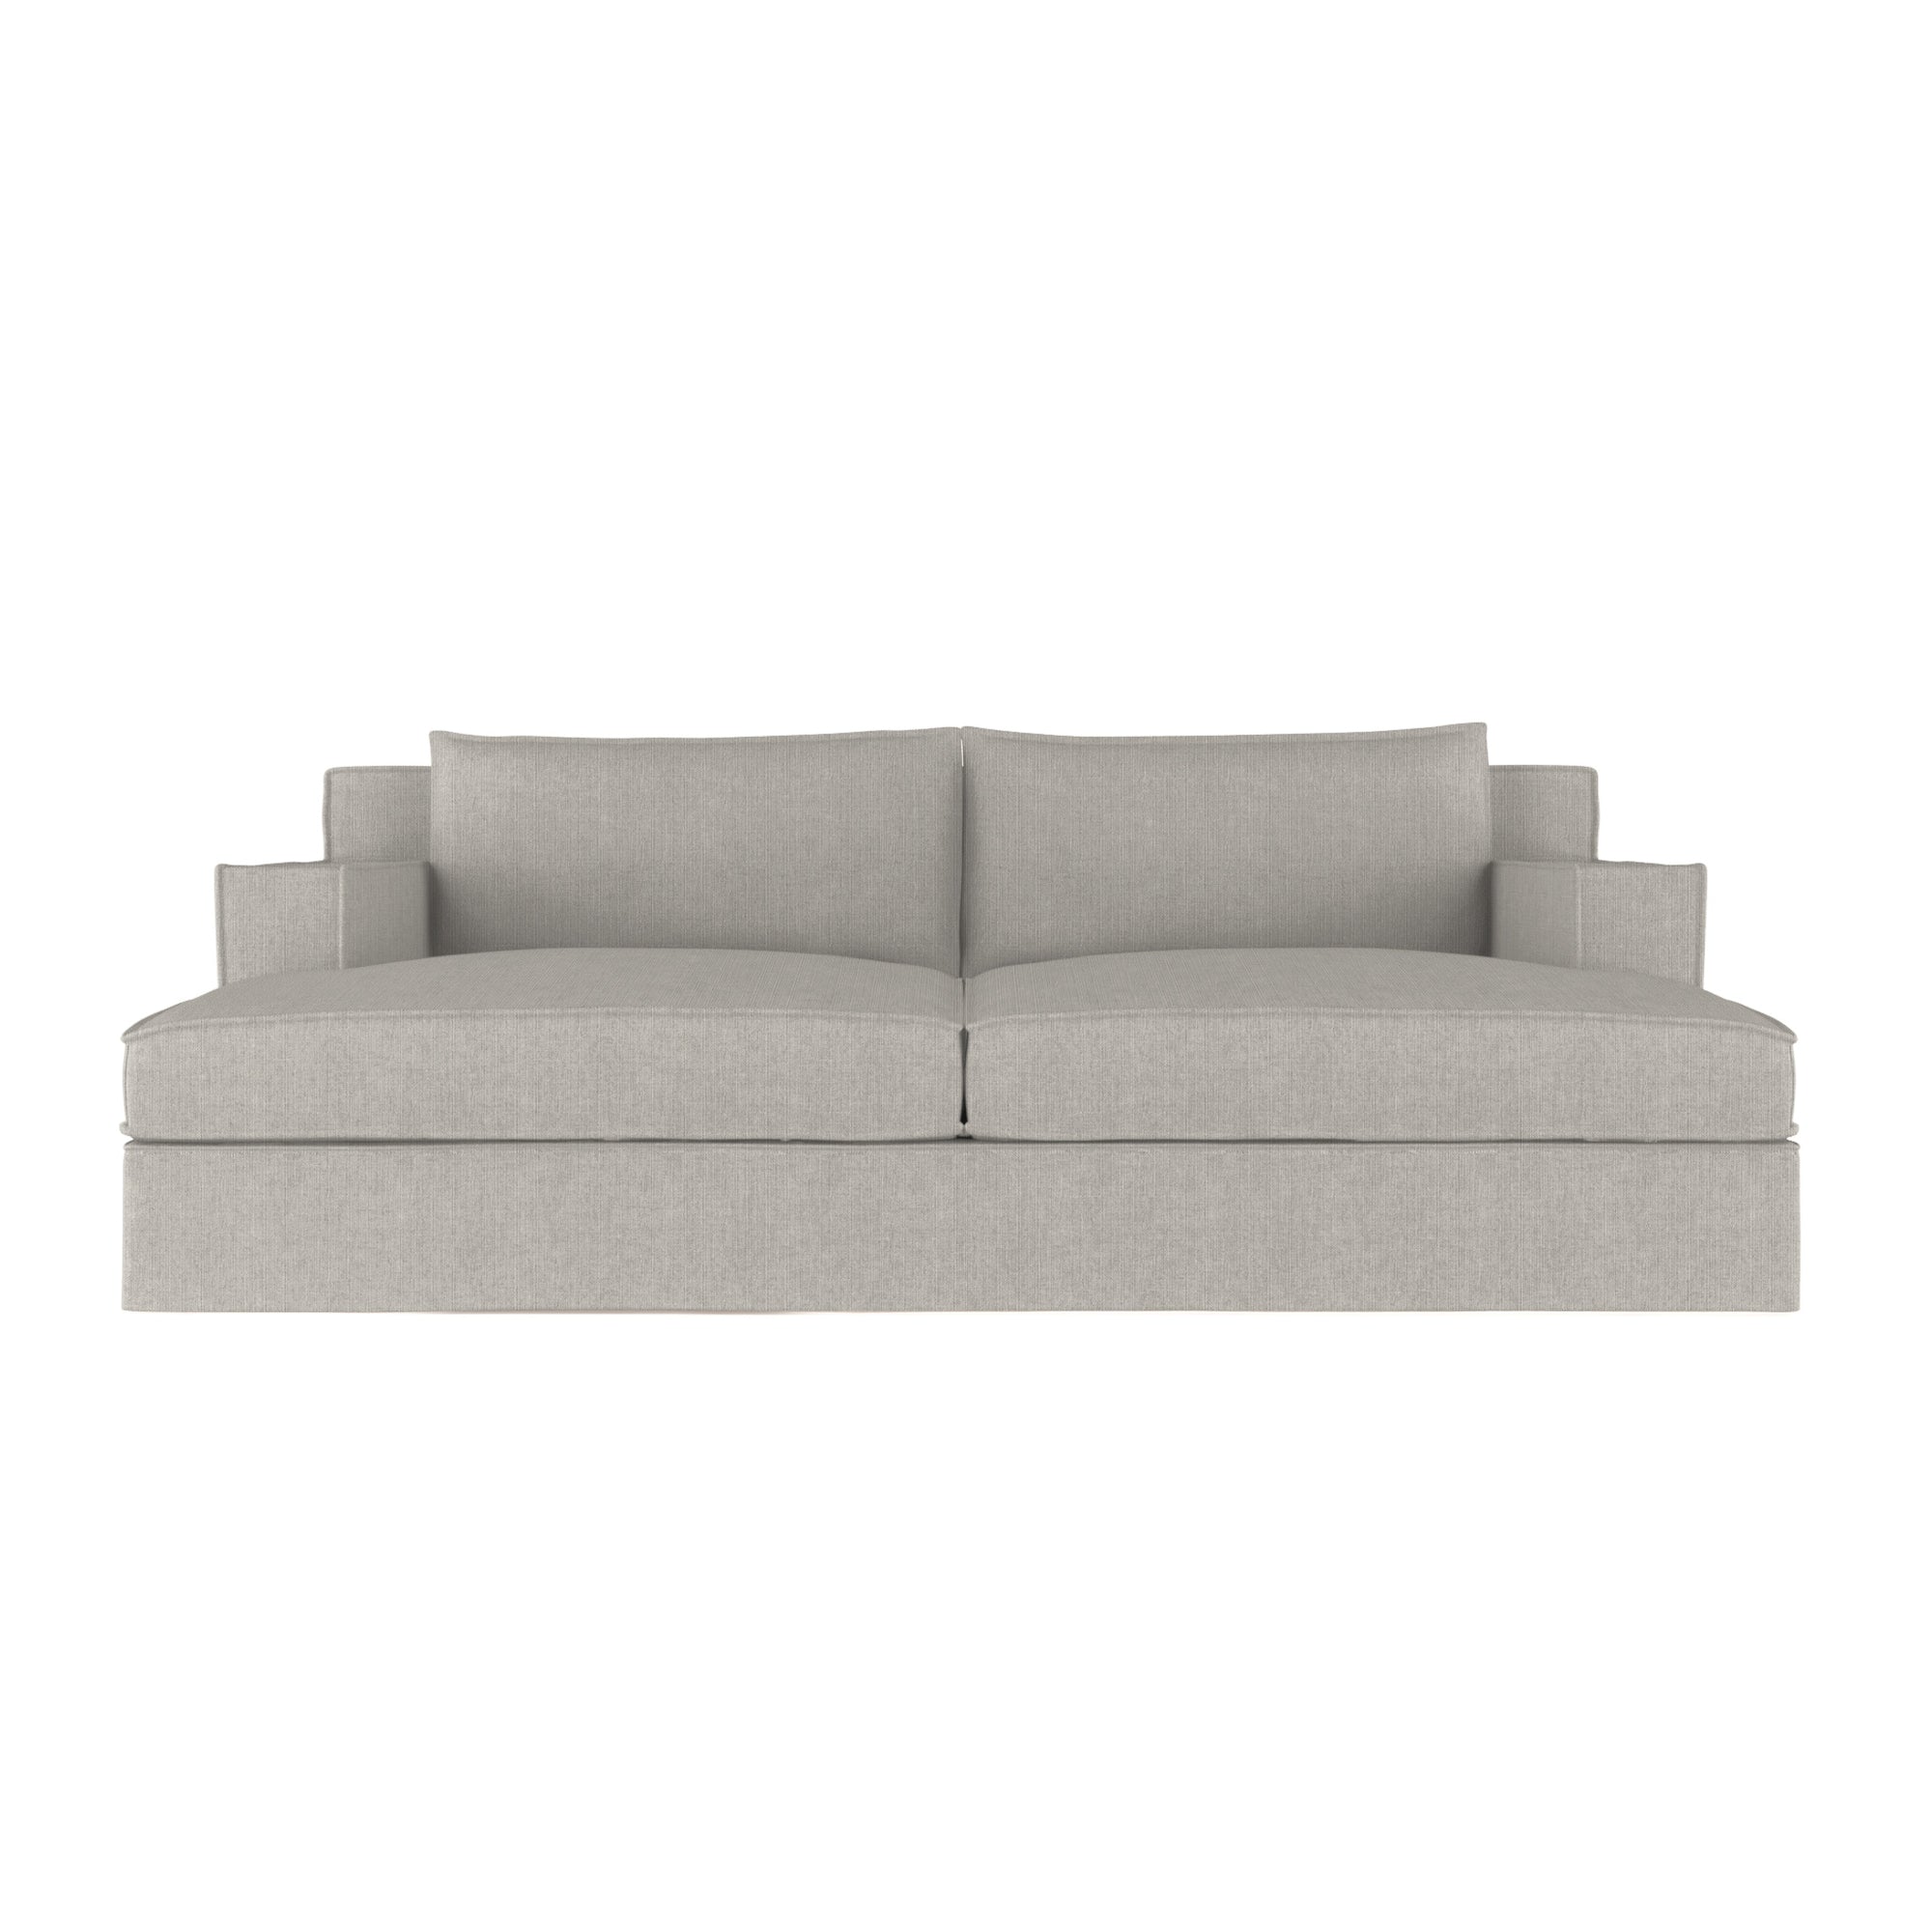 Mulberry Daybed - Silver Streak Box Weave Linen